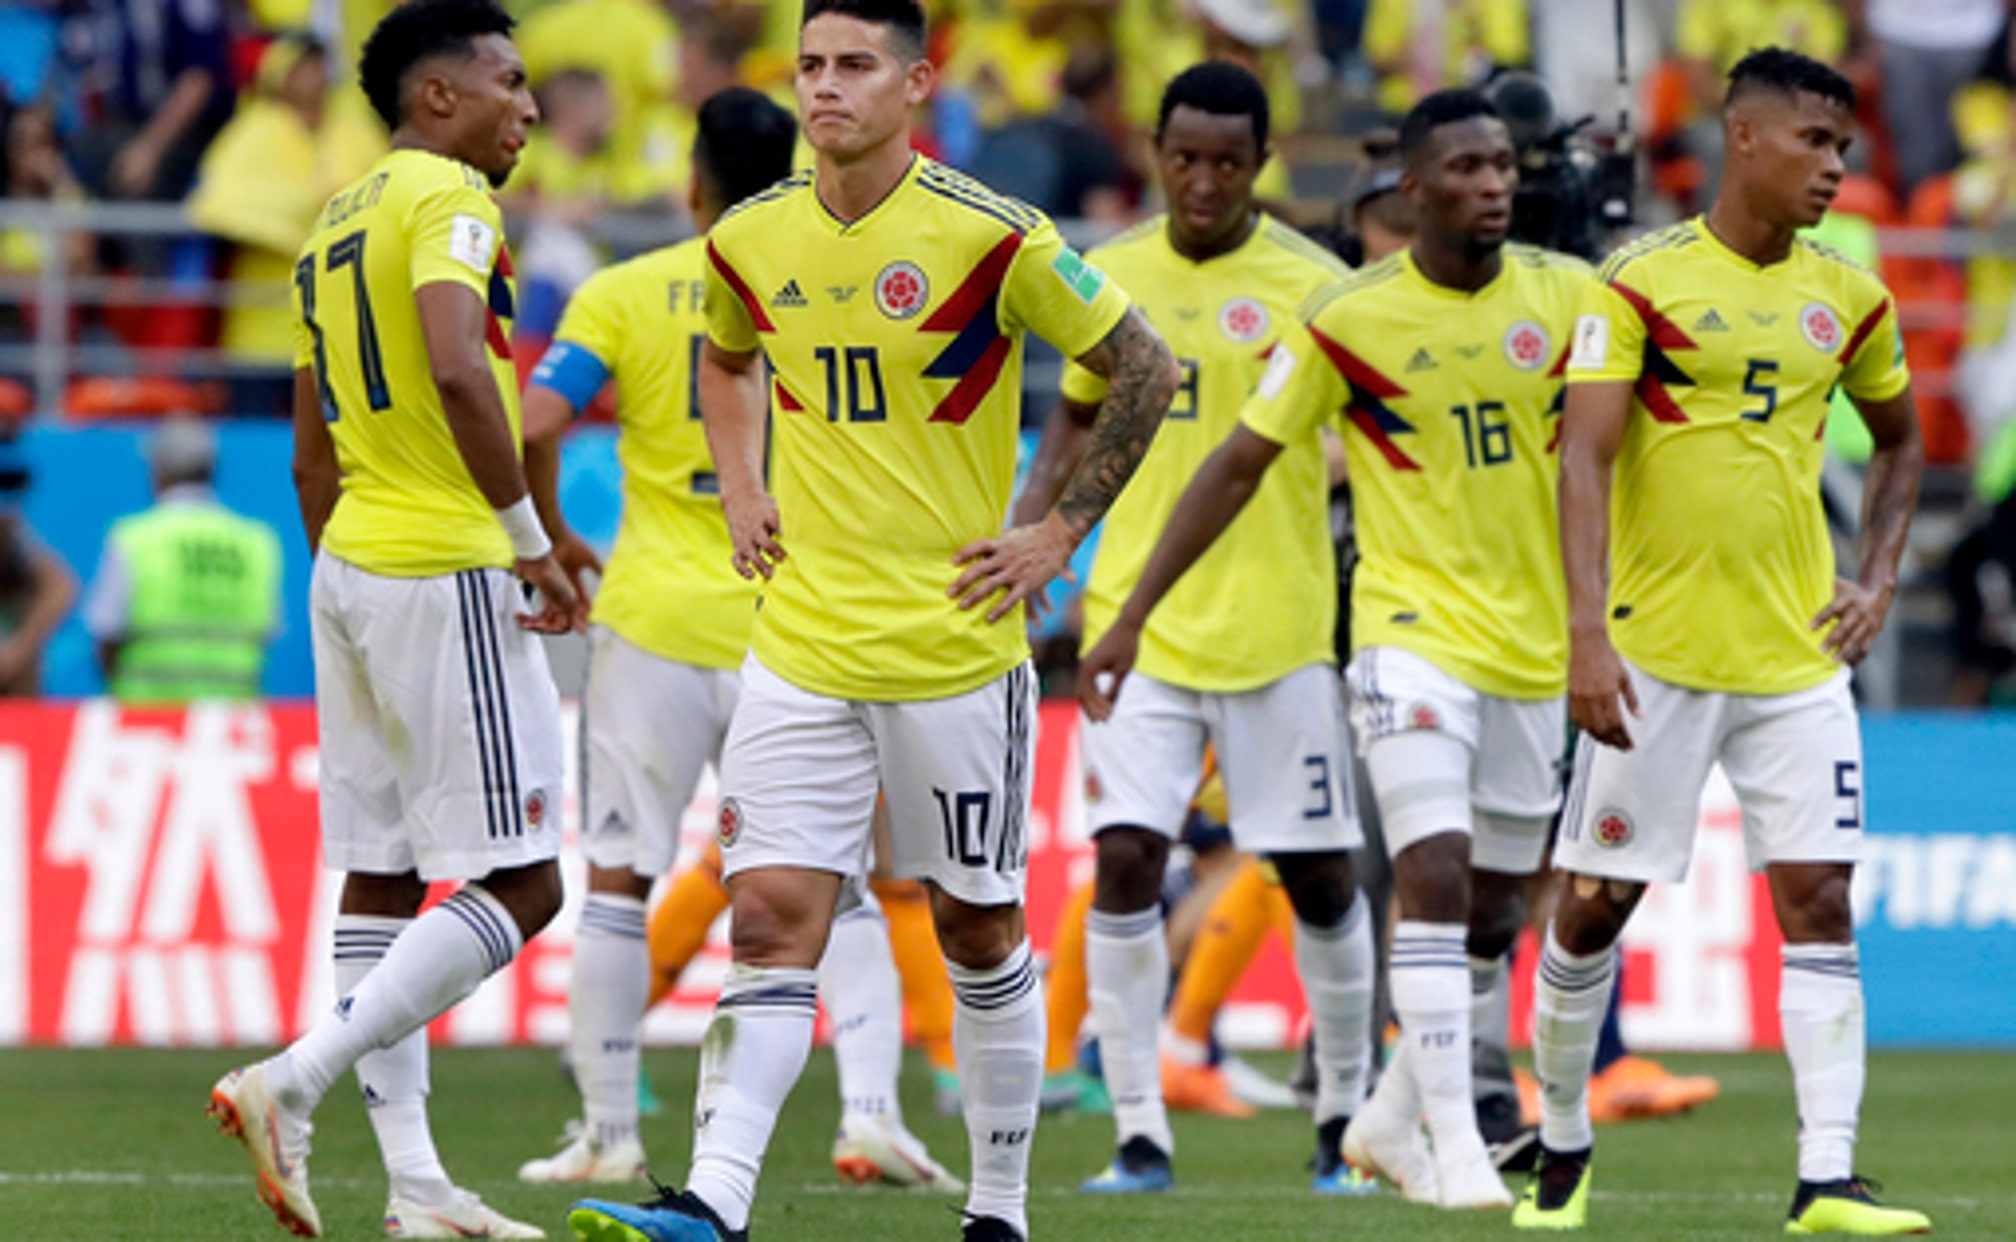 Changes coming to Colombia’s team at World Cup after loss FOX Sports